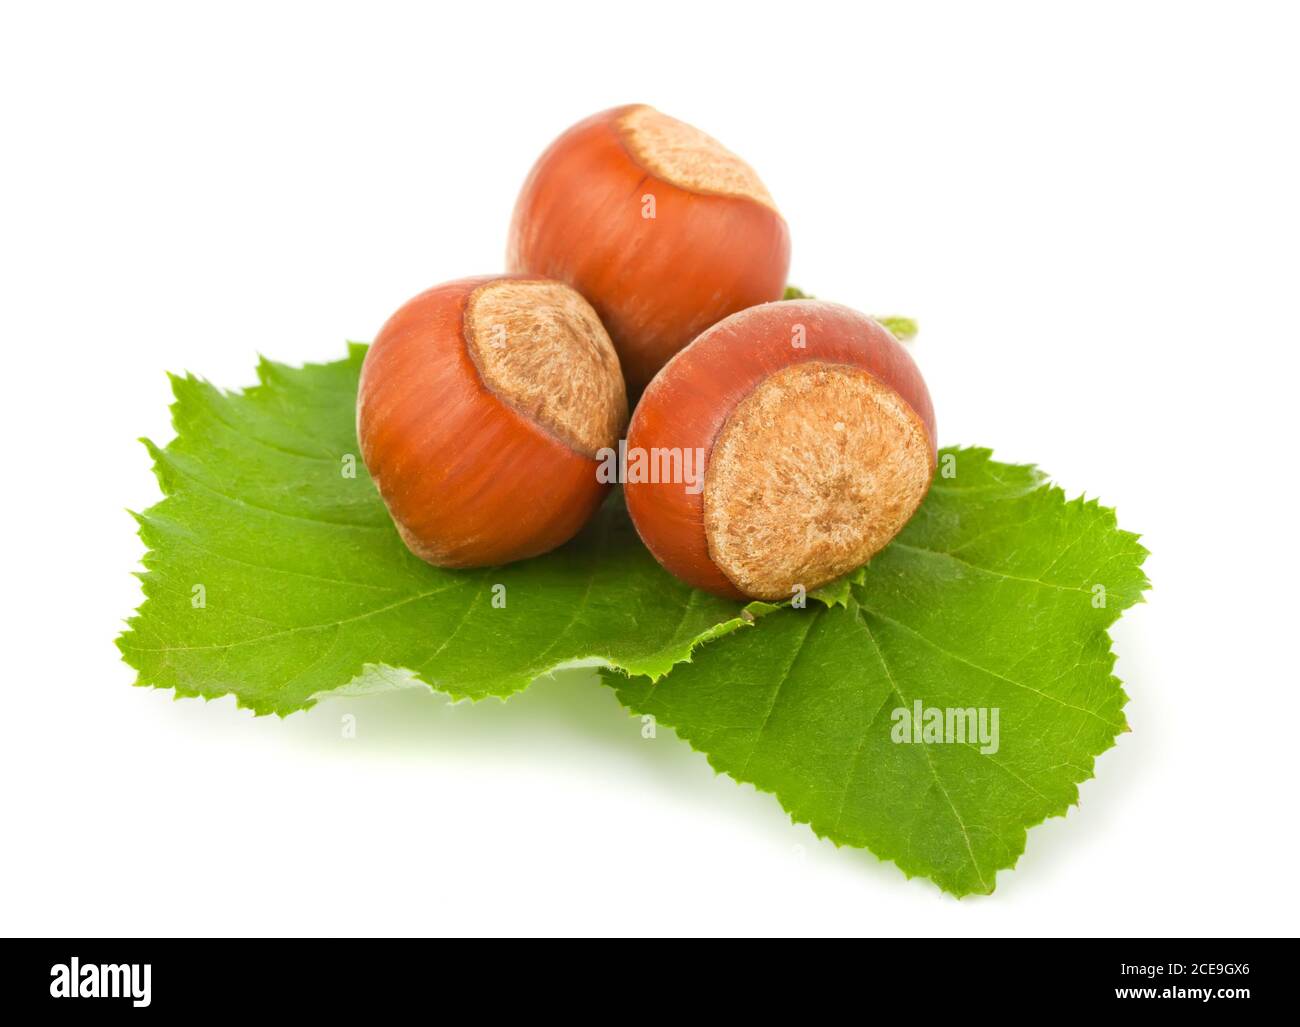 Hazelnuts with green leaves Stock Photo